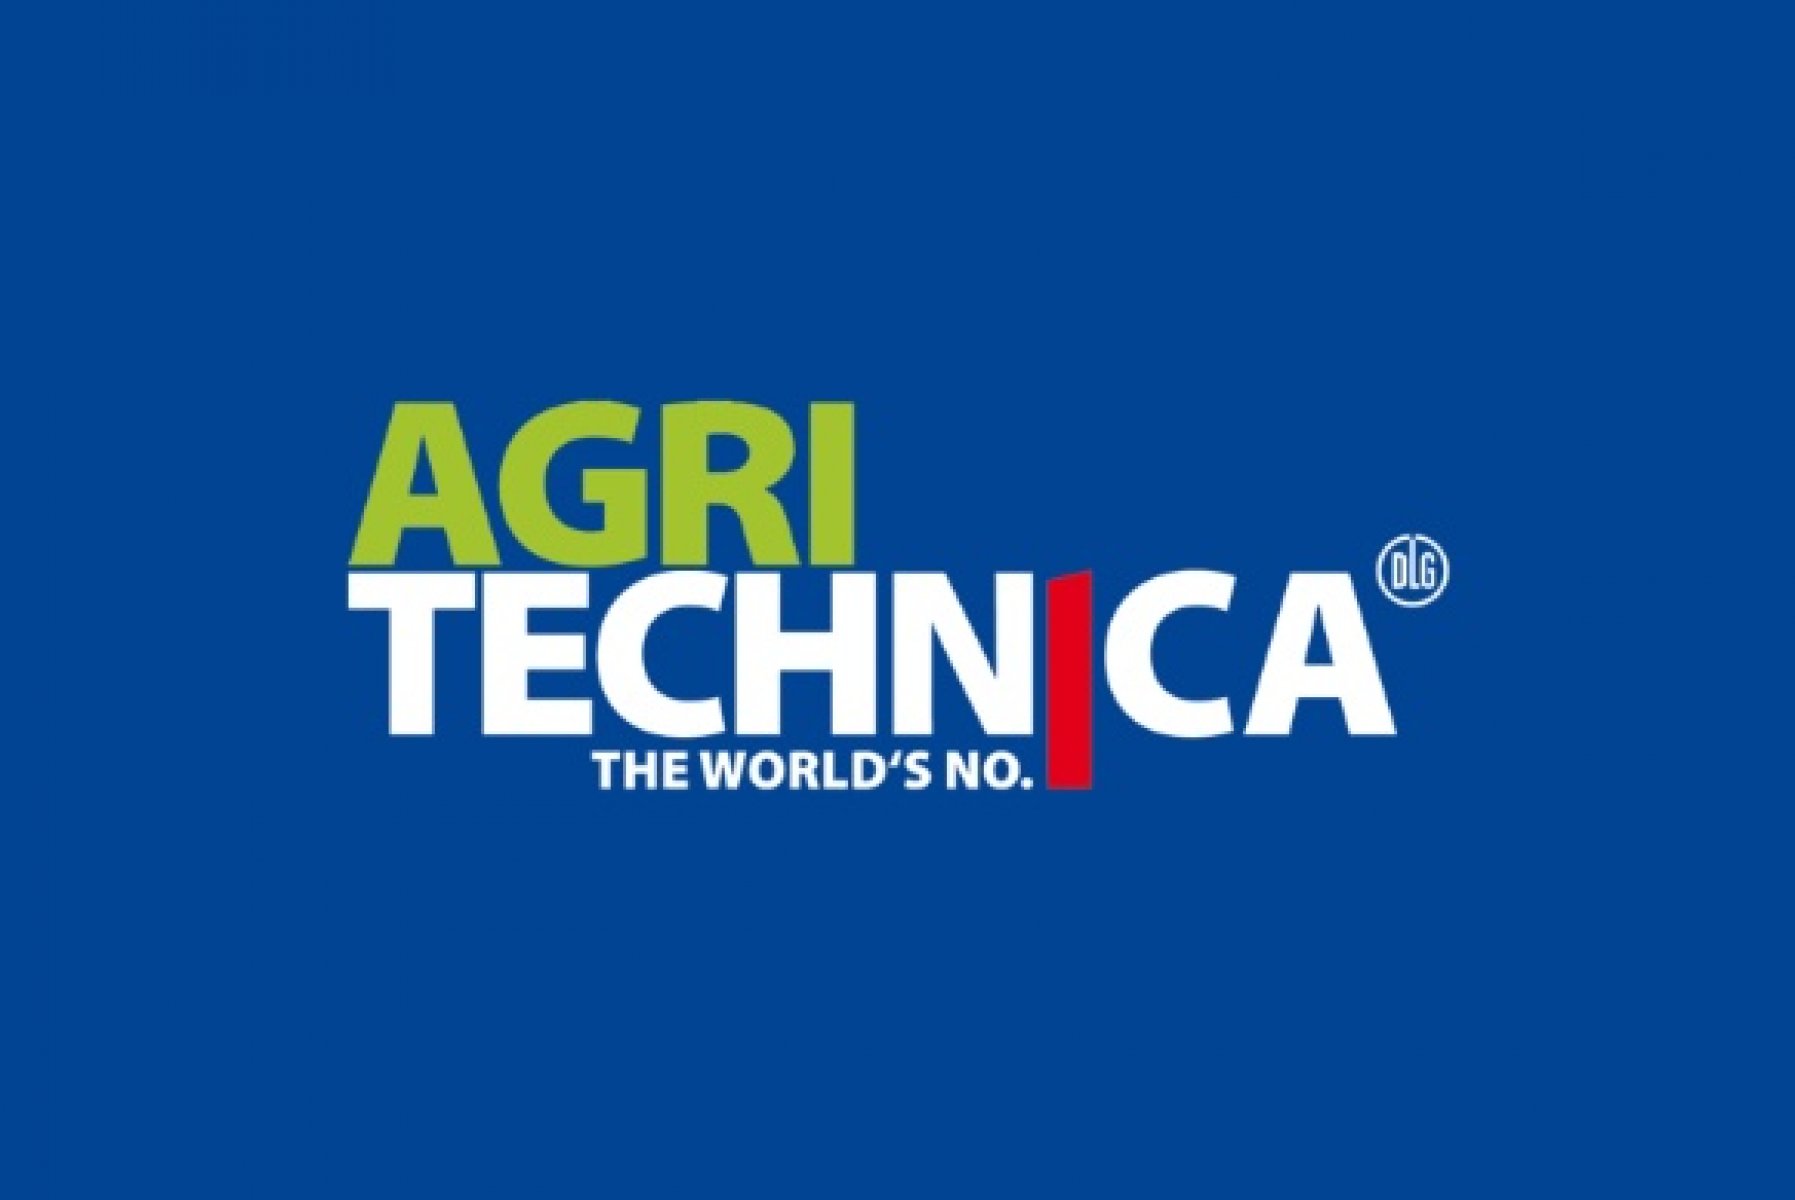 10.-16.11.2019 AGRITECHNICA Hannover, Germany